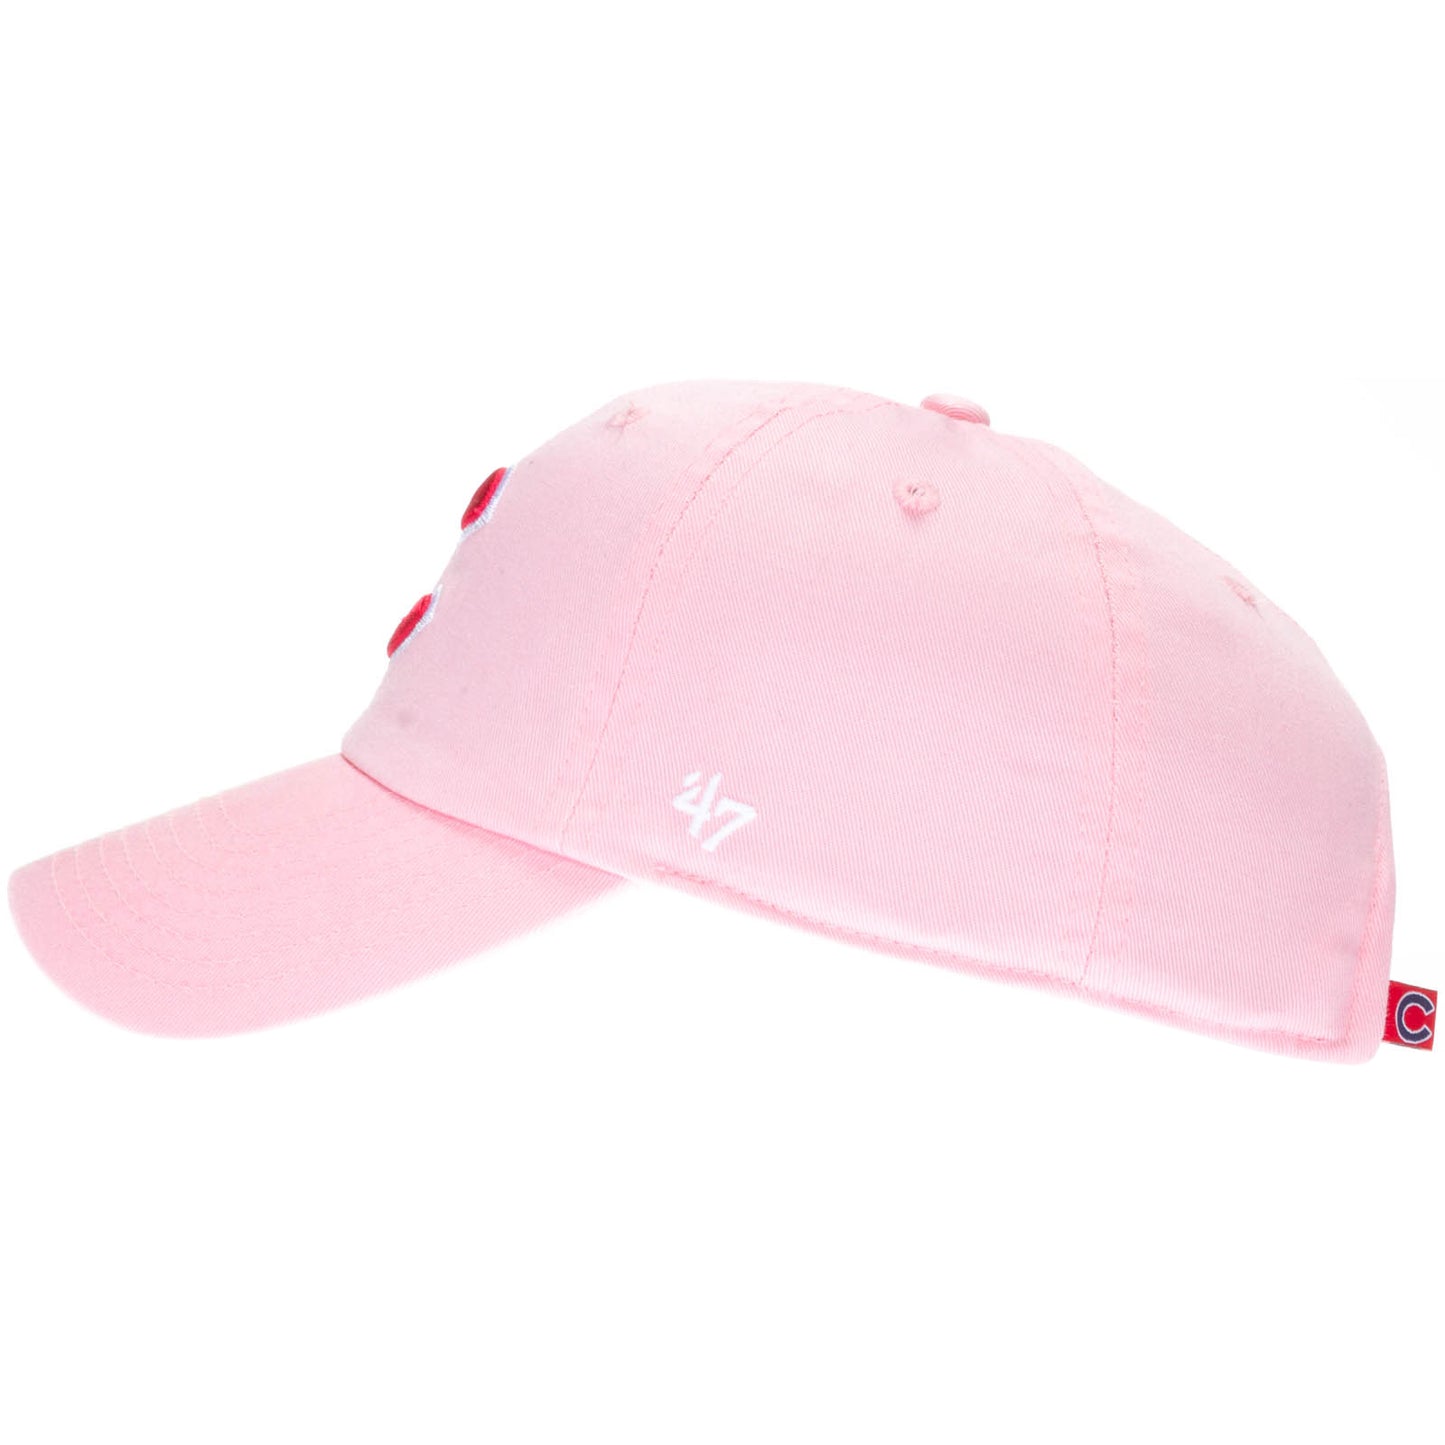 Chicago Cubs Women's Pink Adjustable Clean-Up Hat